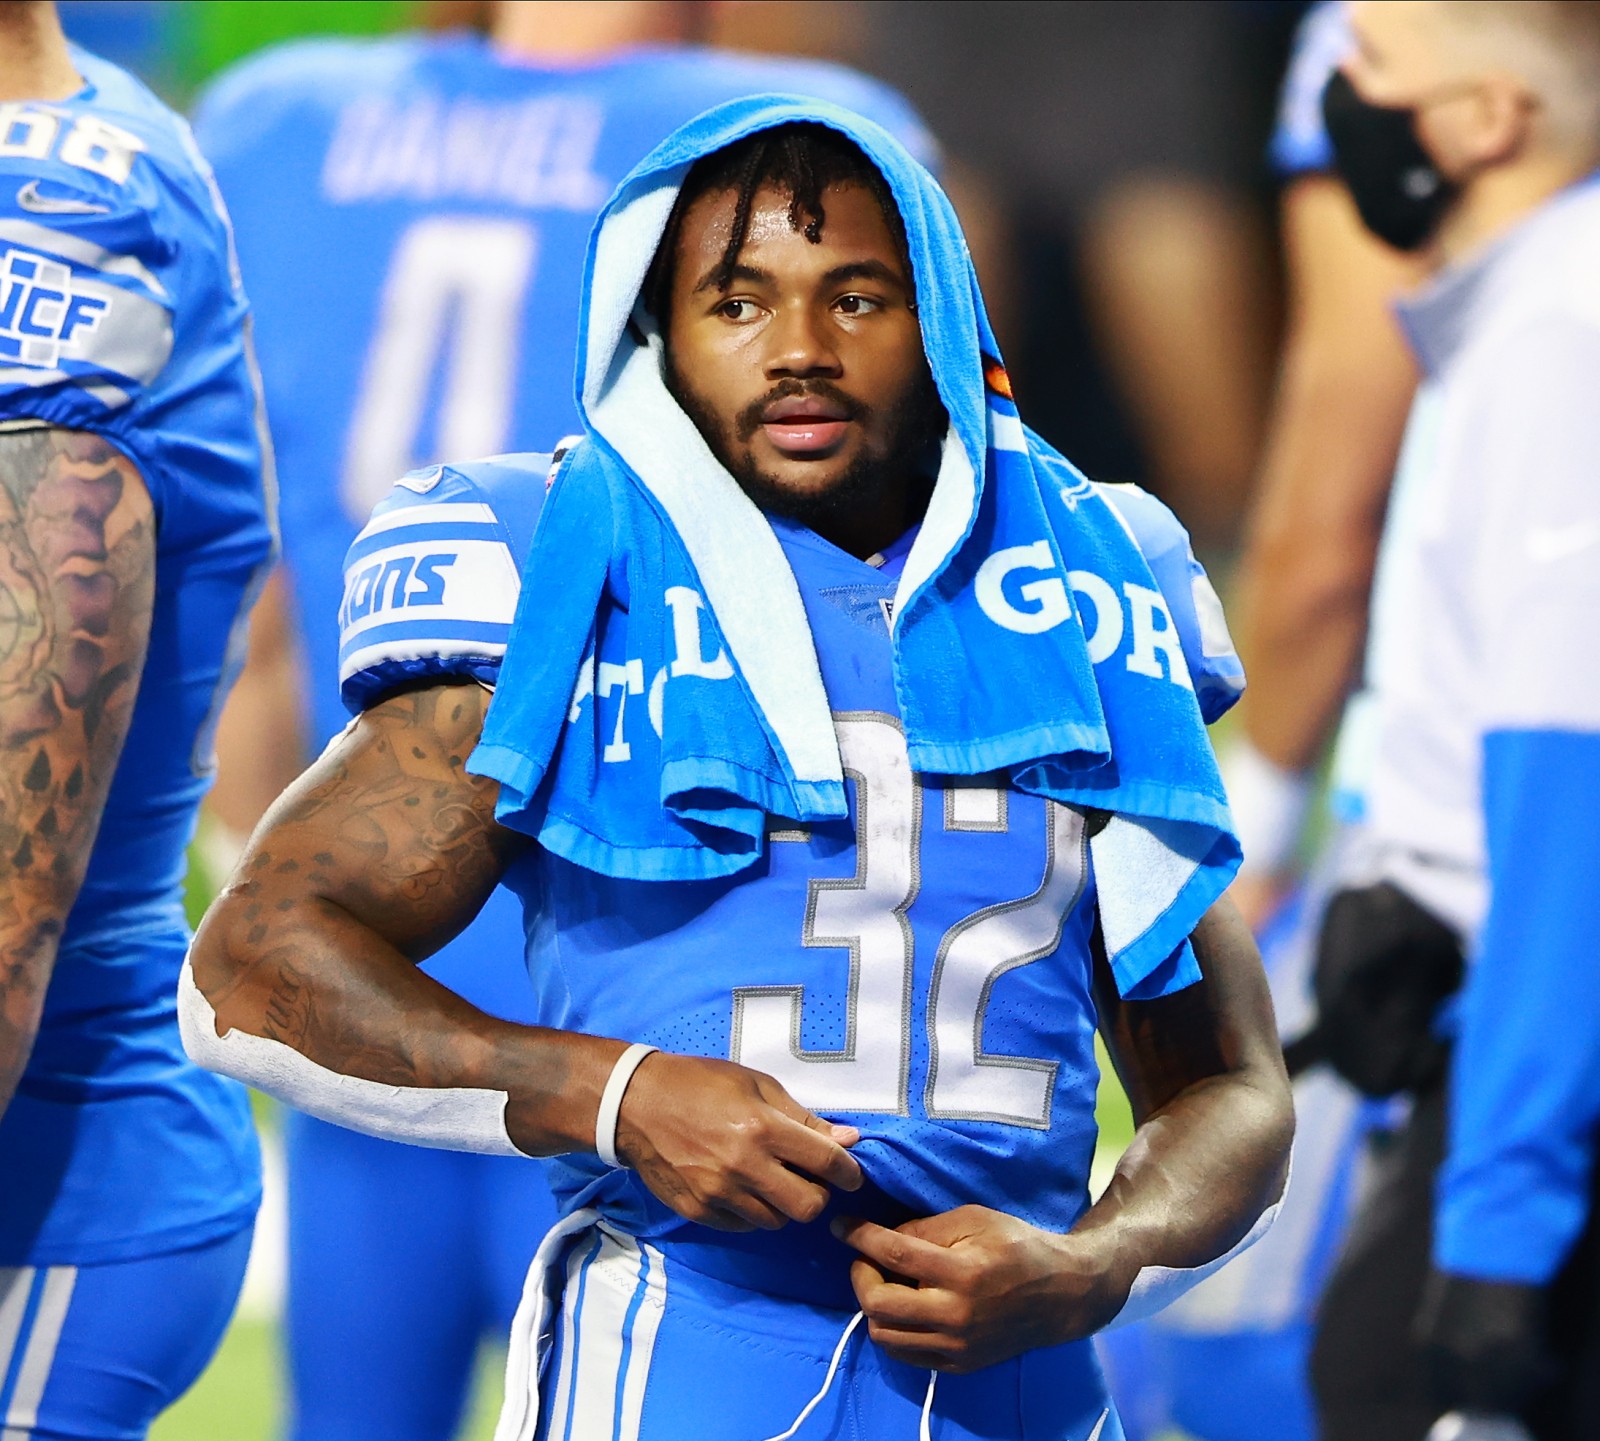 A look at the Detroit Lions projected starters before the NFL draft